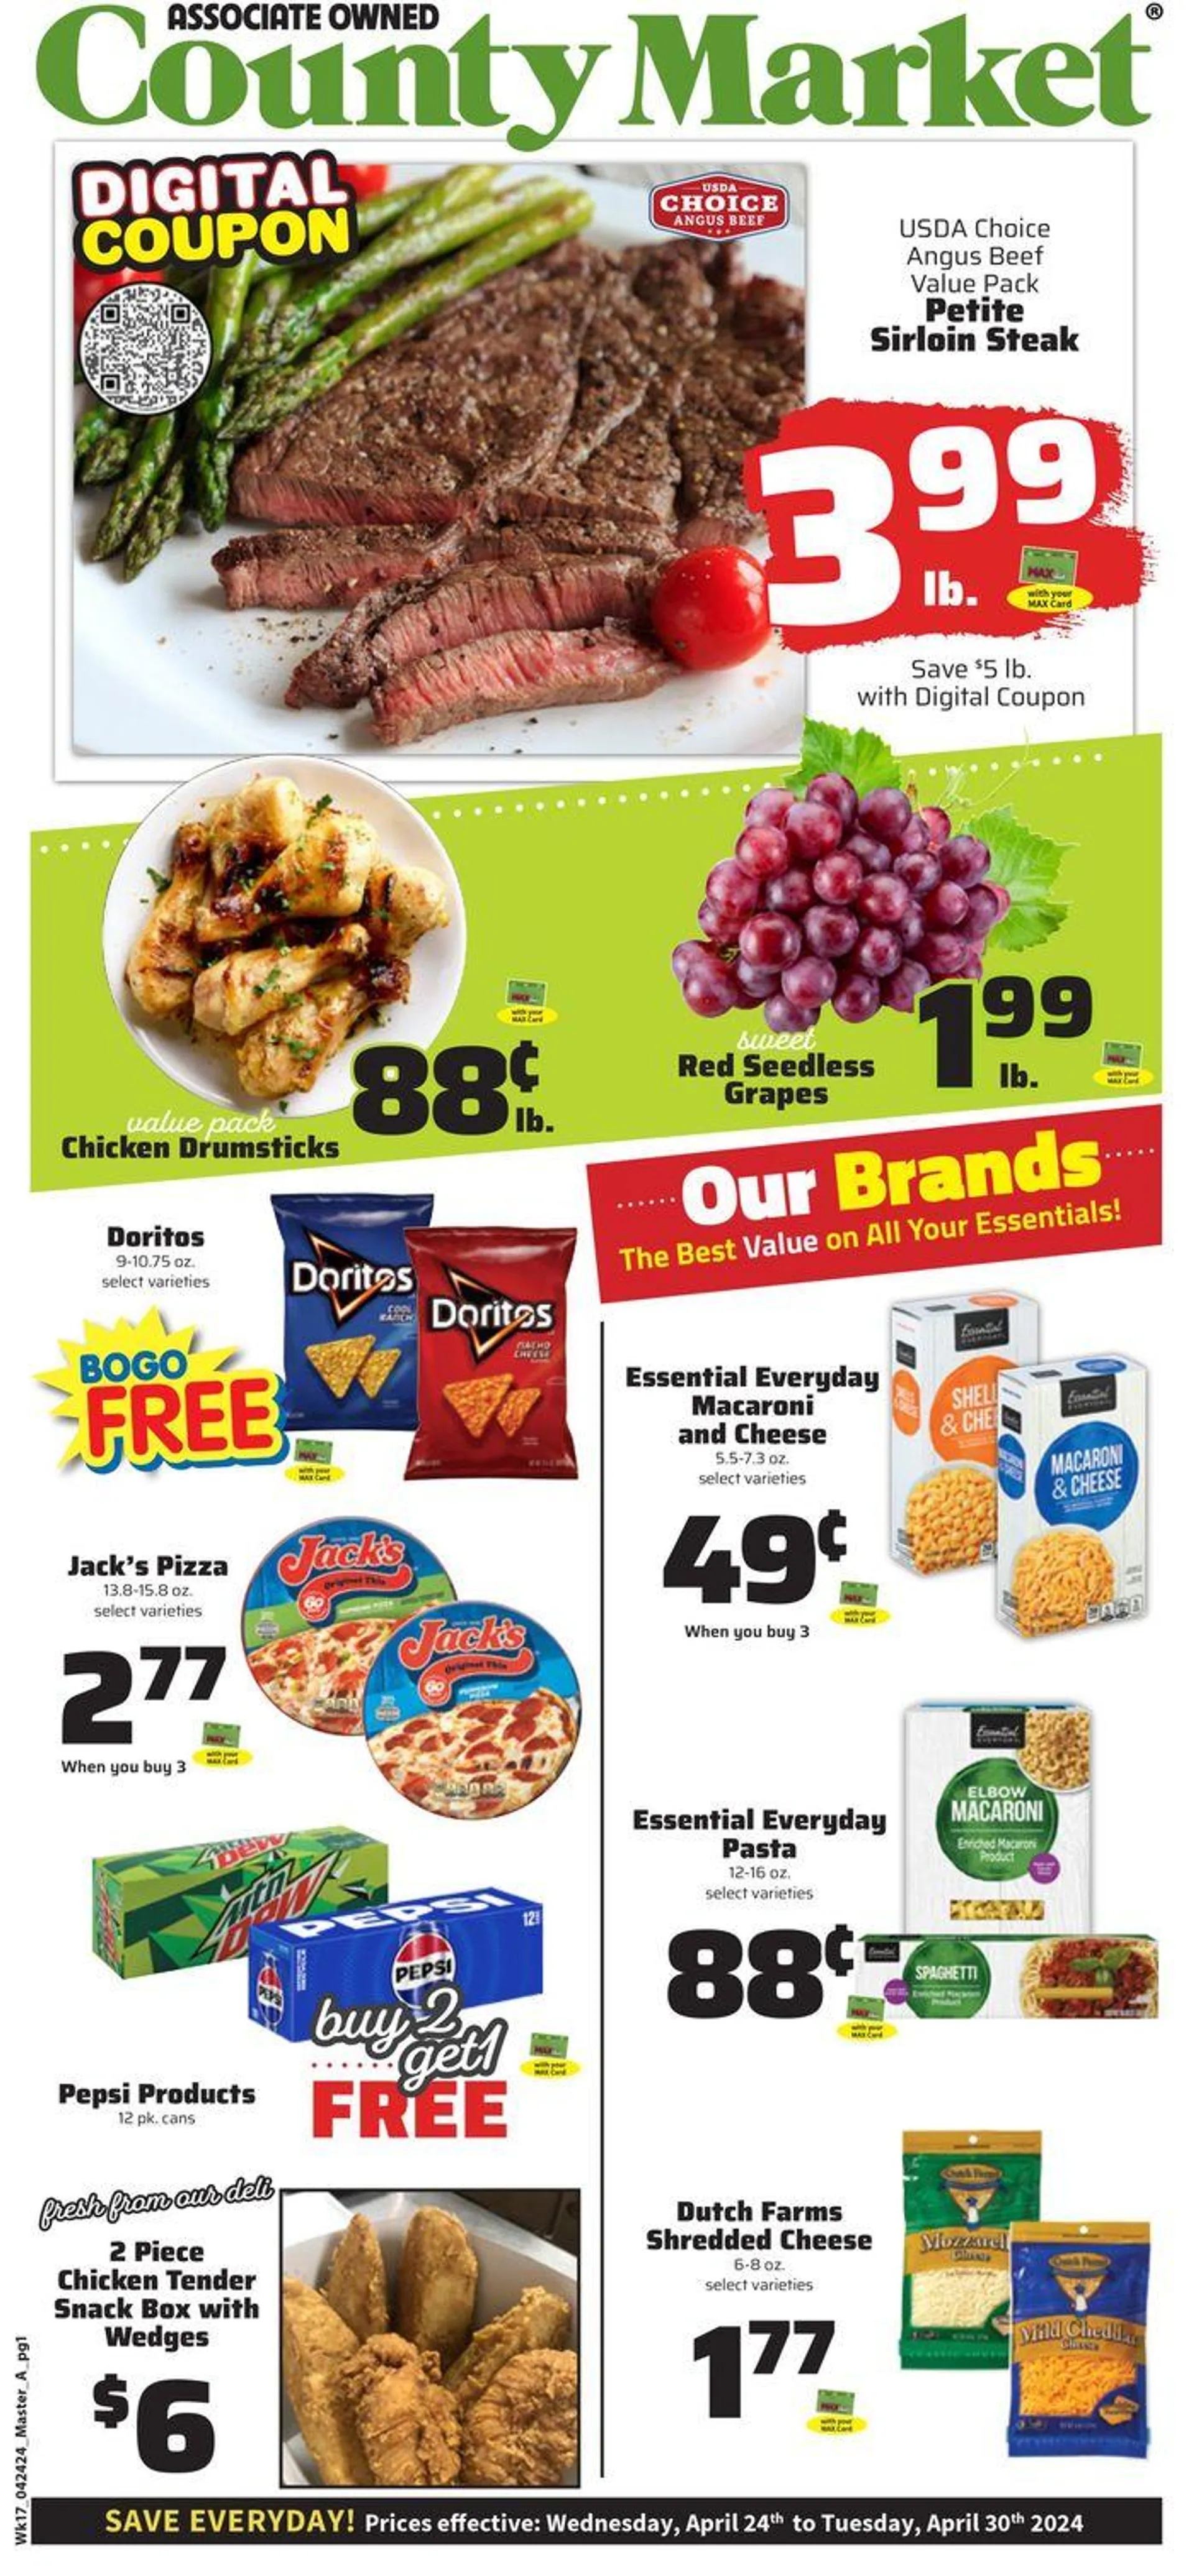 County Market Weekly ad - 2